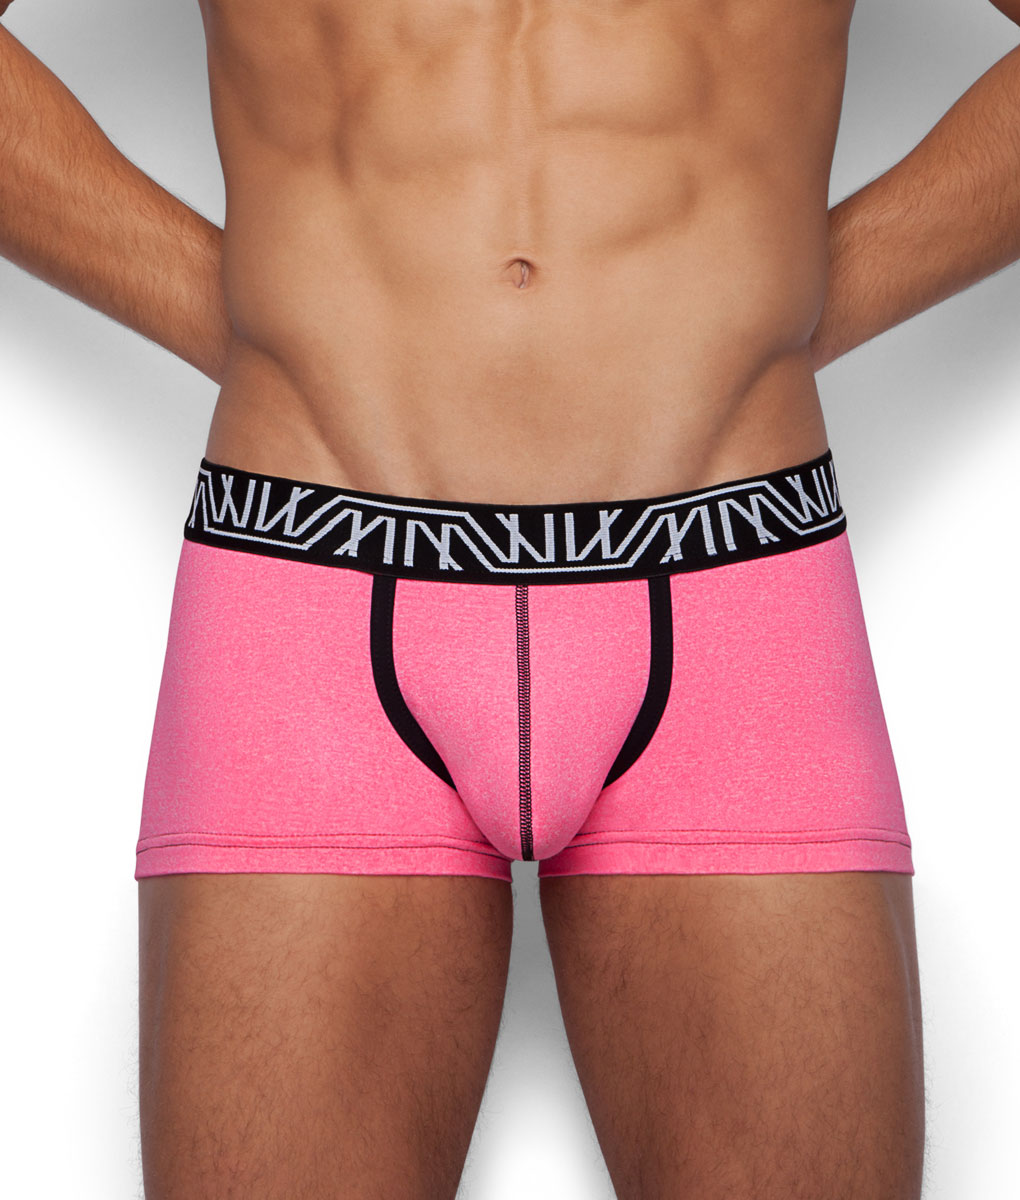 12 X Mens Bonds Total Package Trunks Underwear Charcoal / Pink